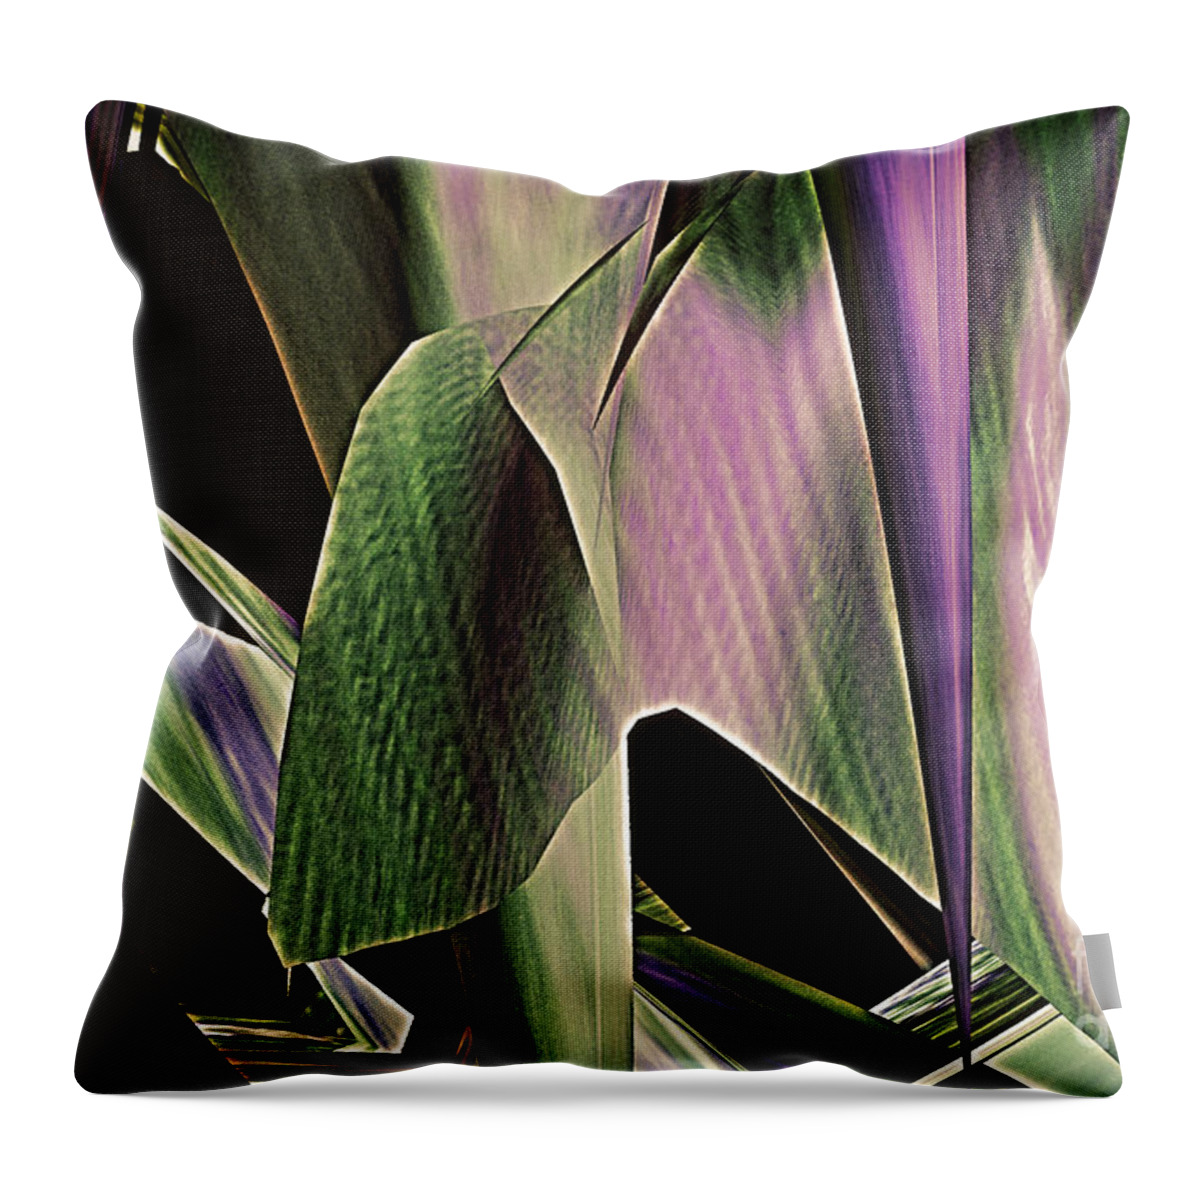 Abstract Throw Pillow featuring the painting Abstract 456 by Gerlinde Keating